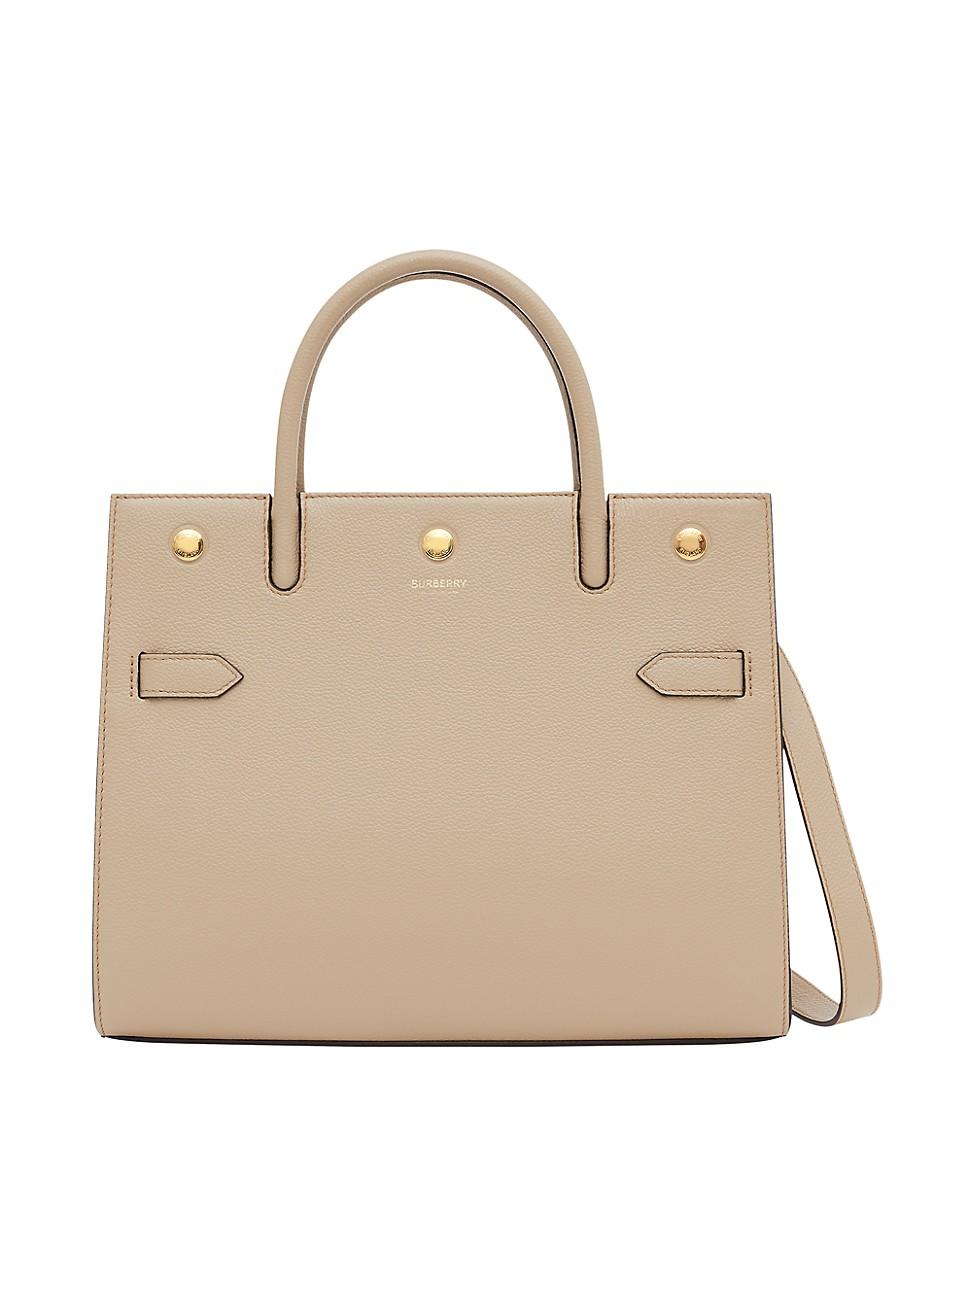 Burberry Medium Title Leather Satchel in White (Natural) | Lyst